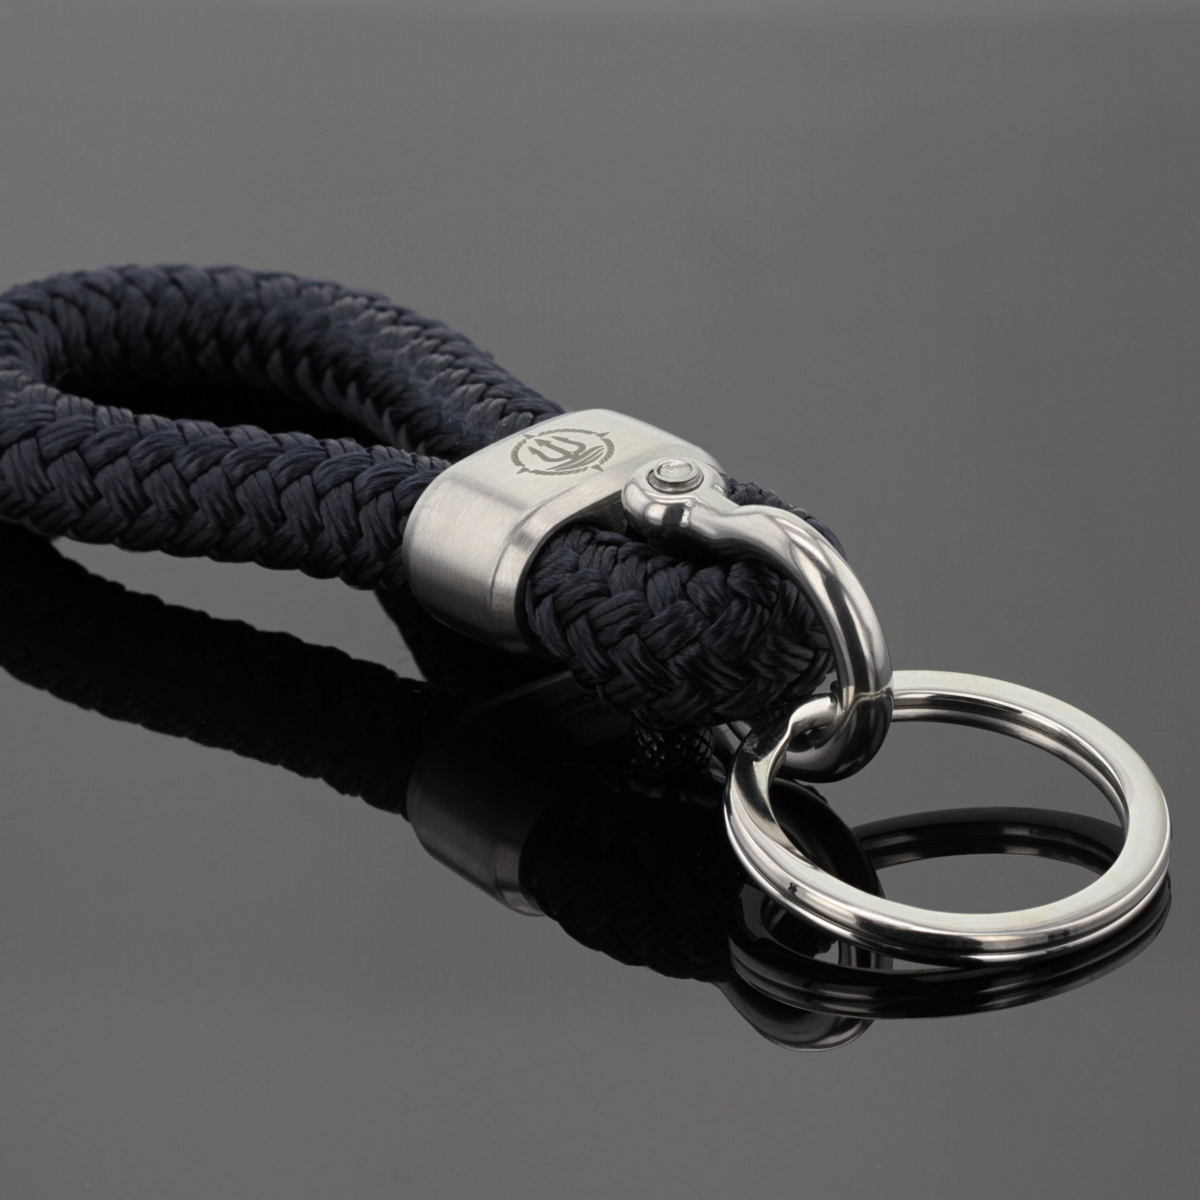 Keychain made of dark blue marine rope and stainless steel.